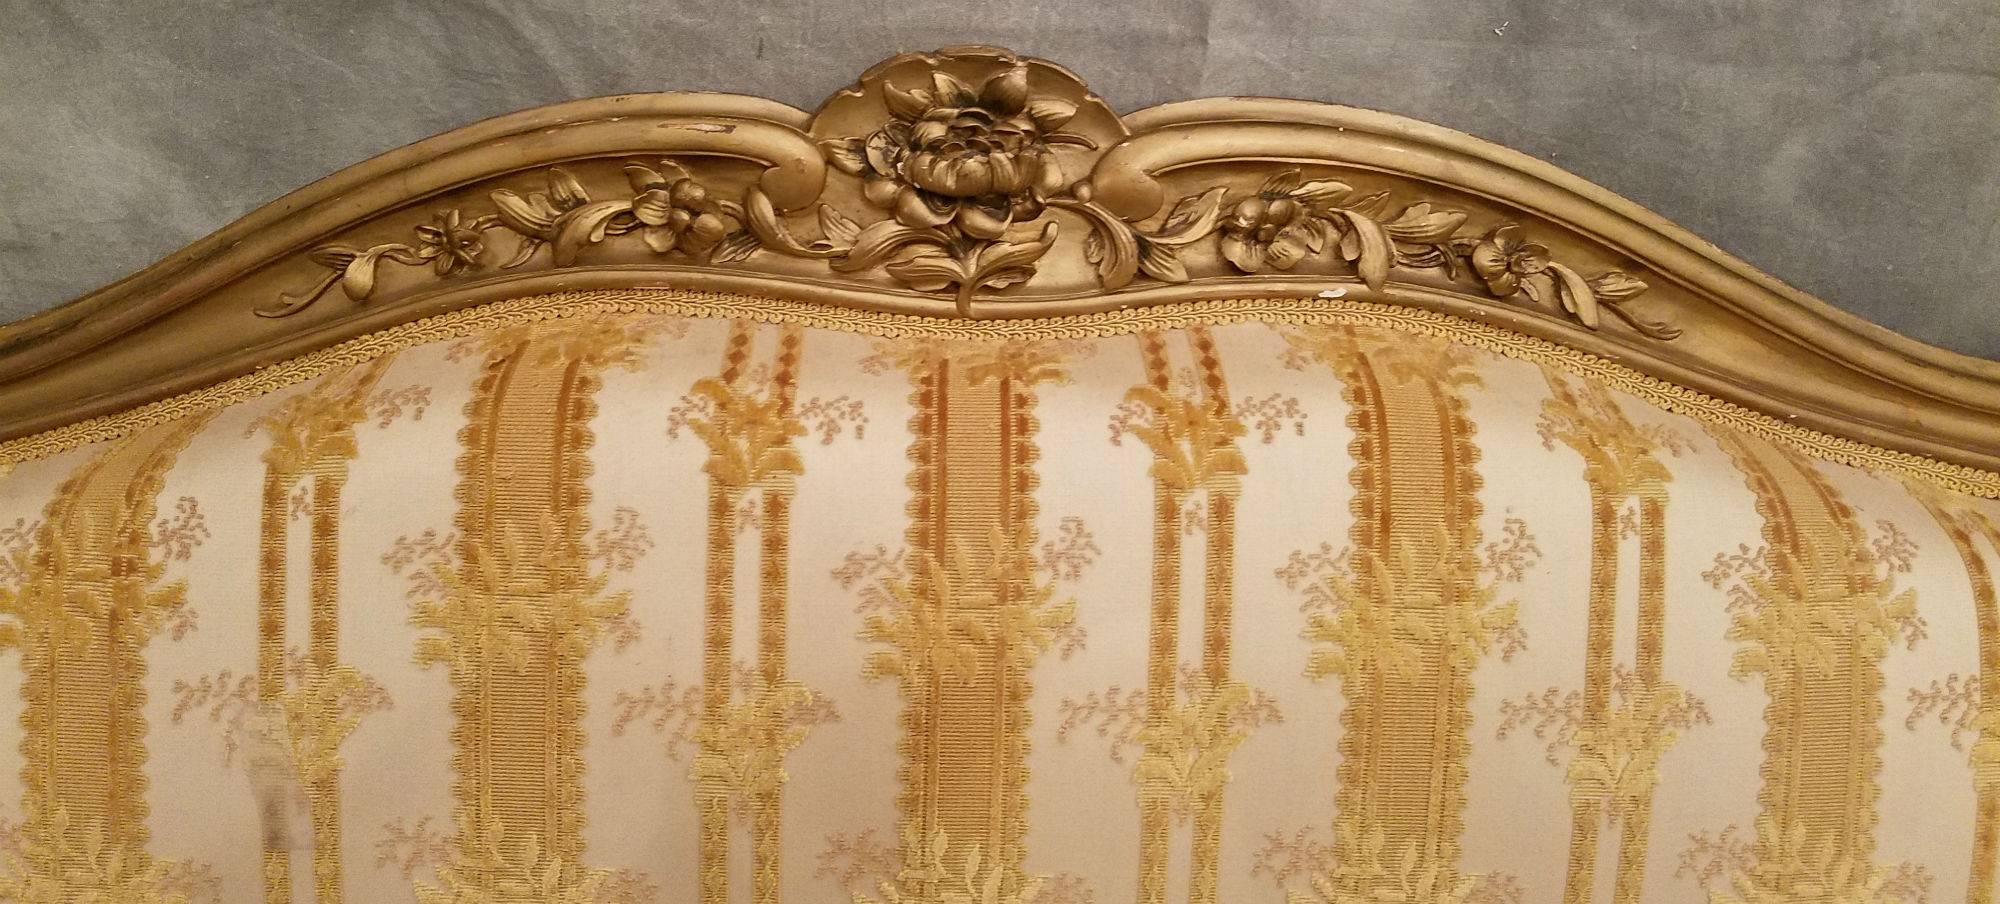 Louis XV style carved and gilded six leg canape with rosette and leaf carved crest and seat rail and carved cabriole legs ending in scroll feet.